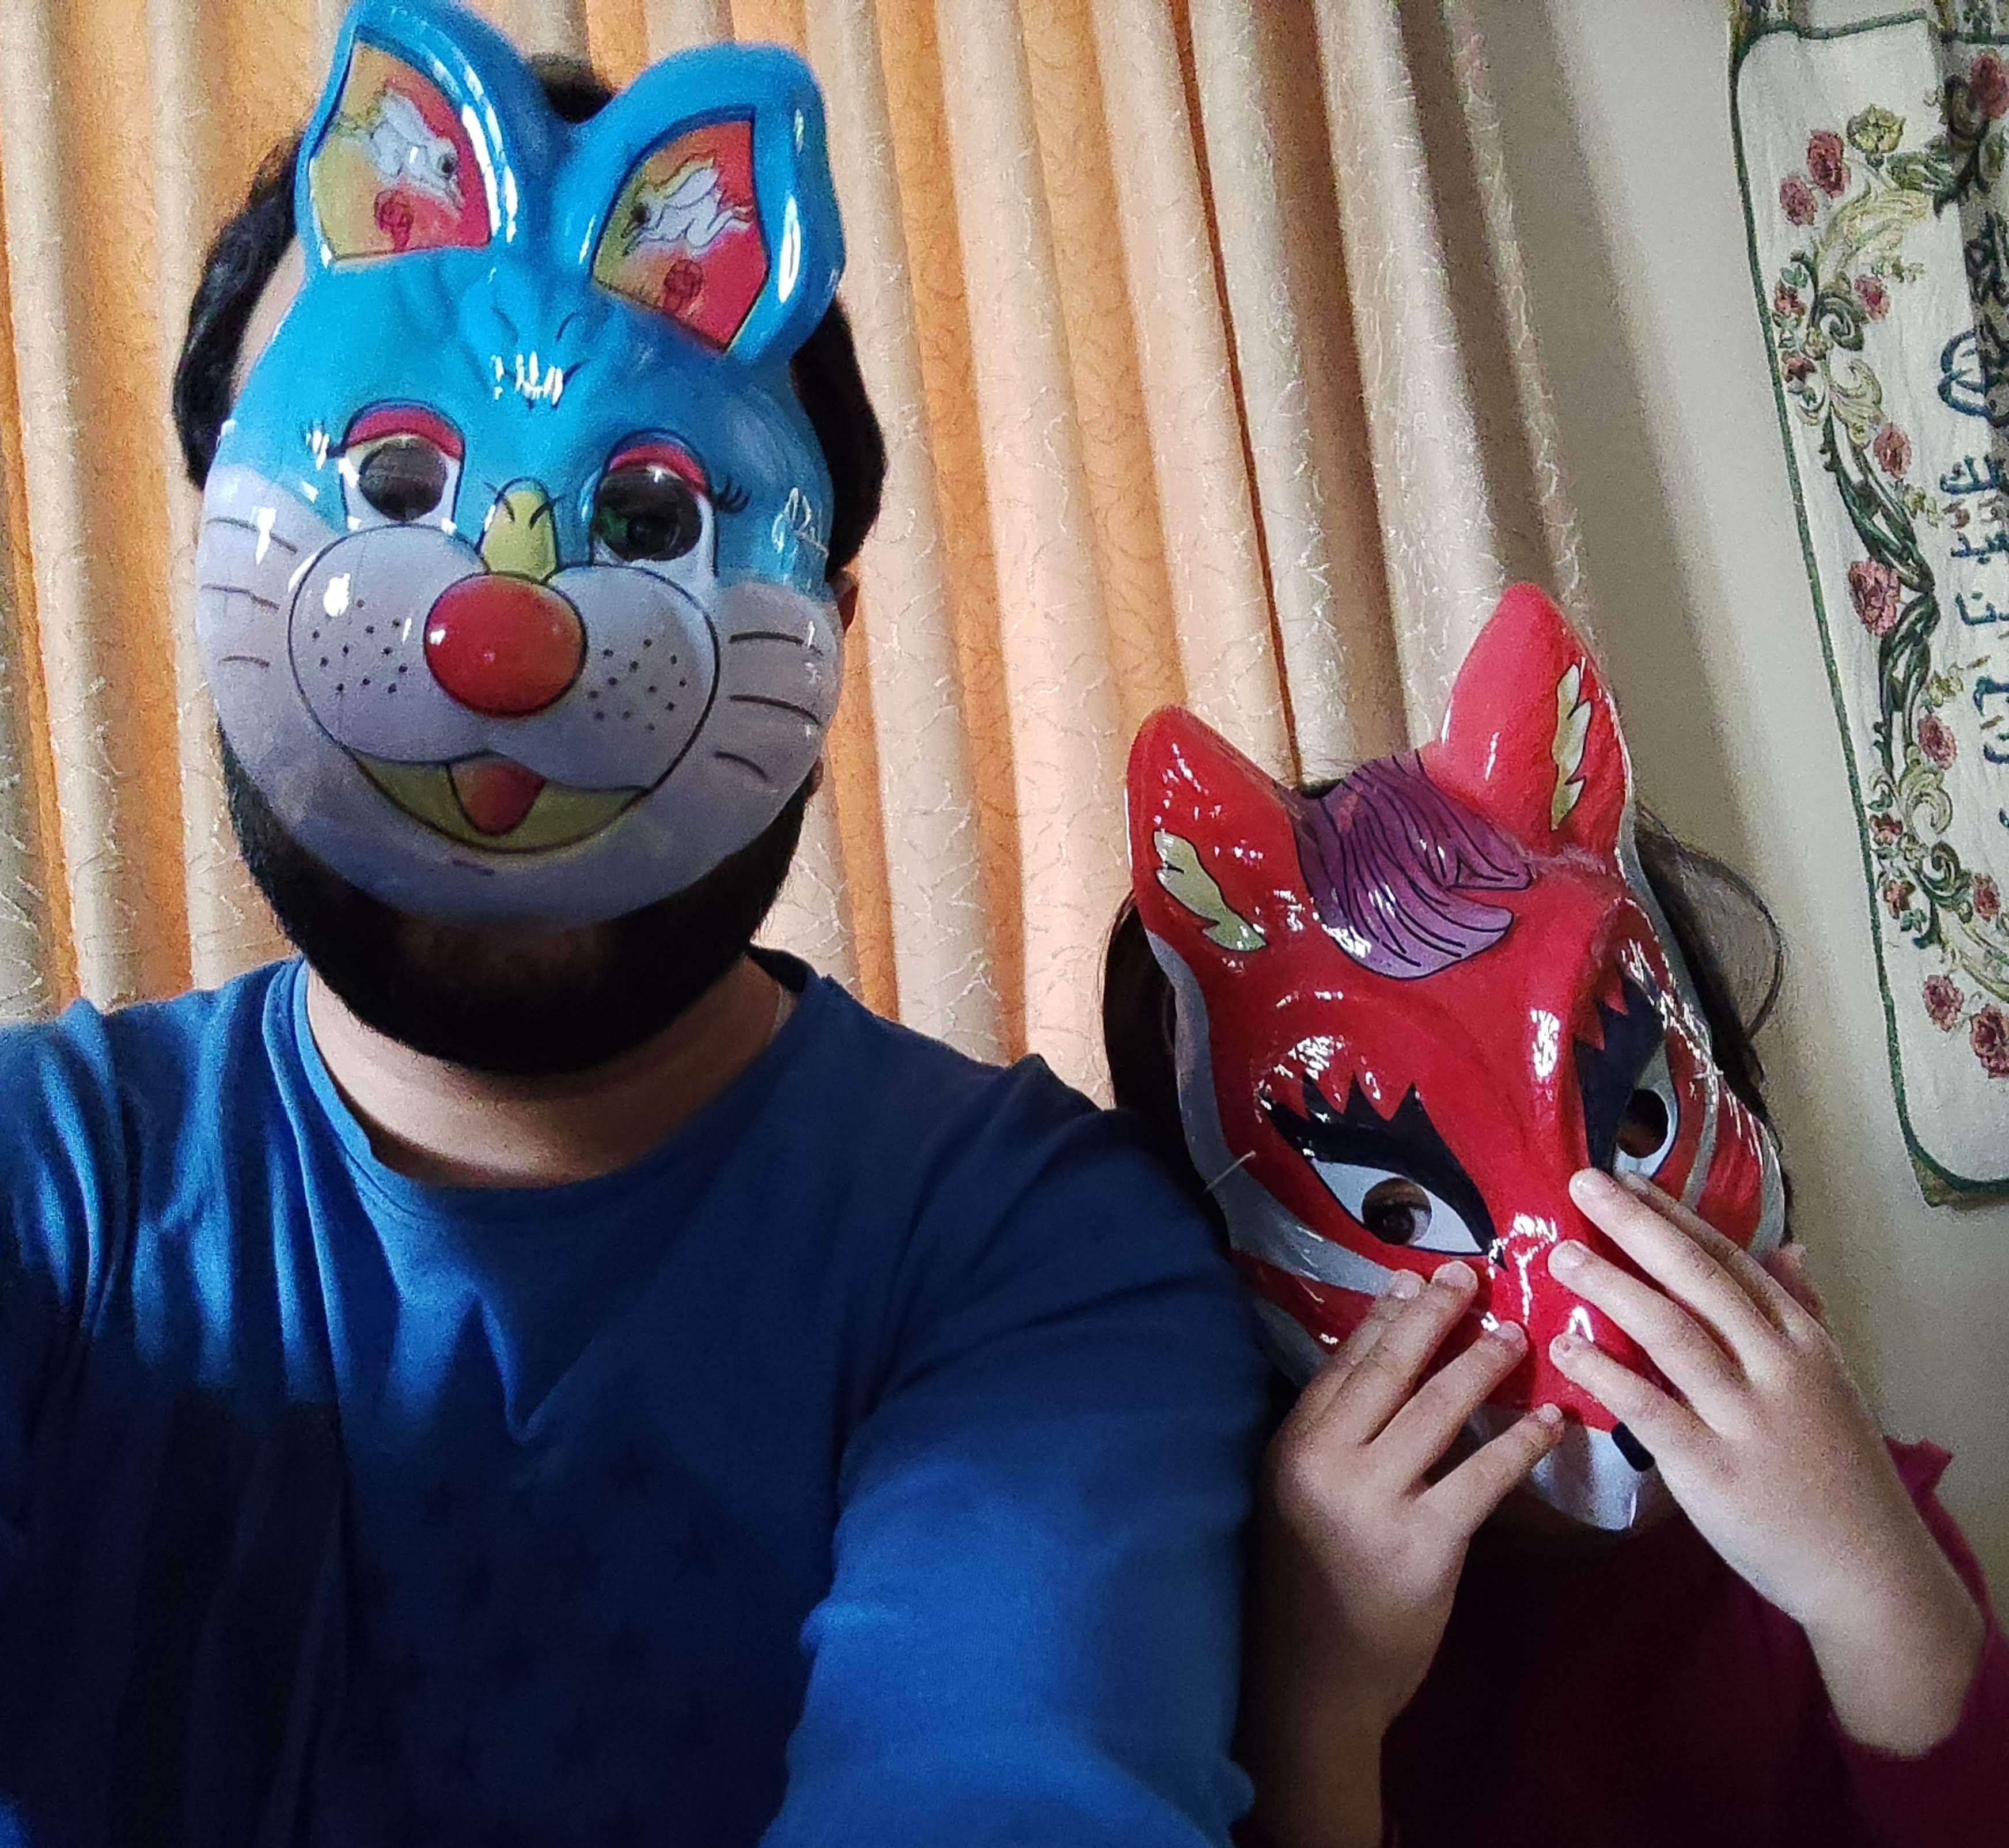 Me and my daughter with masks on!